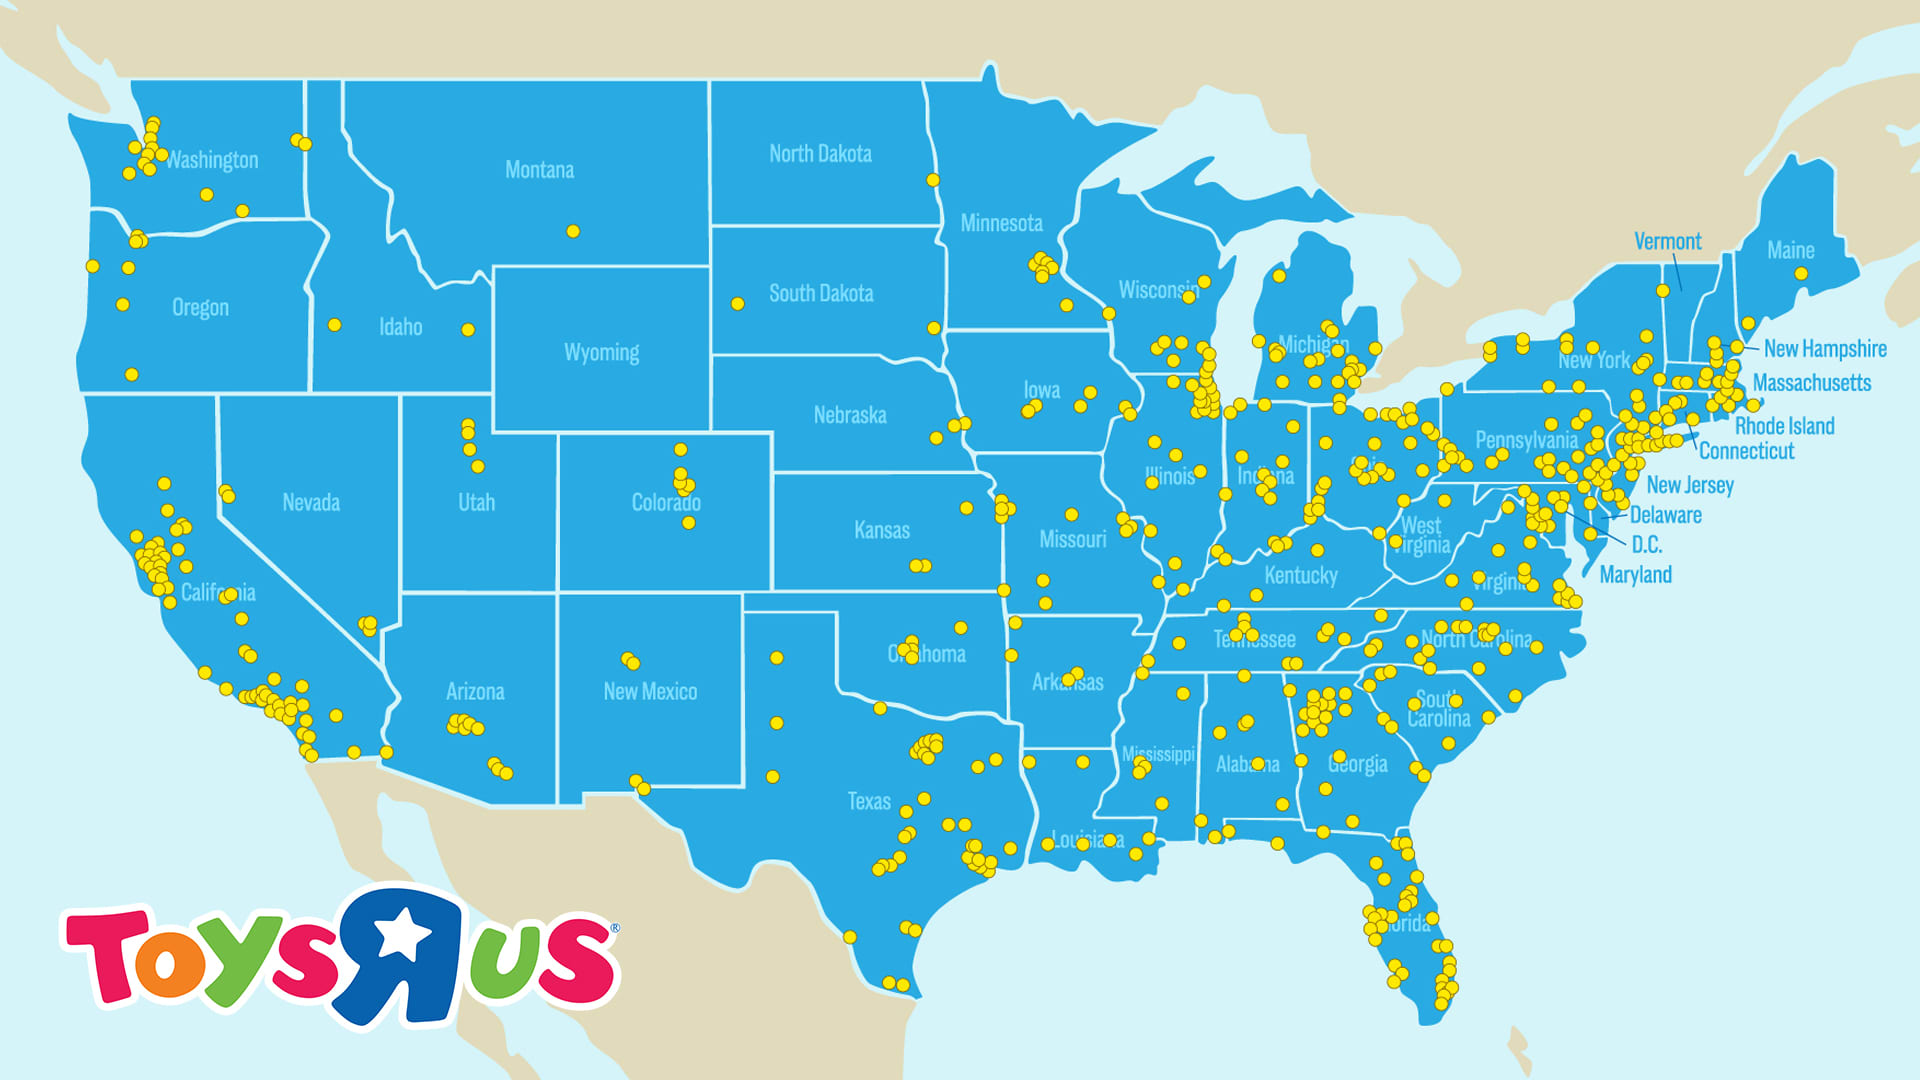 toys r us locations in texas